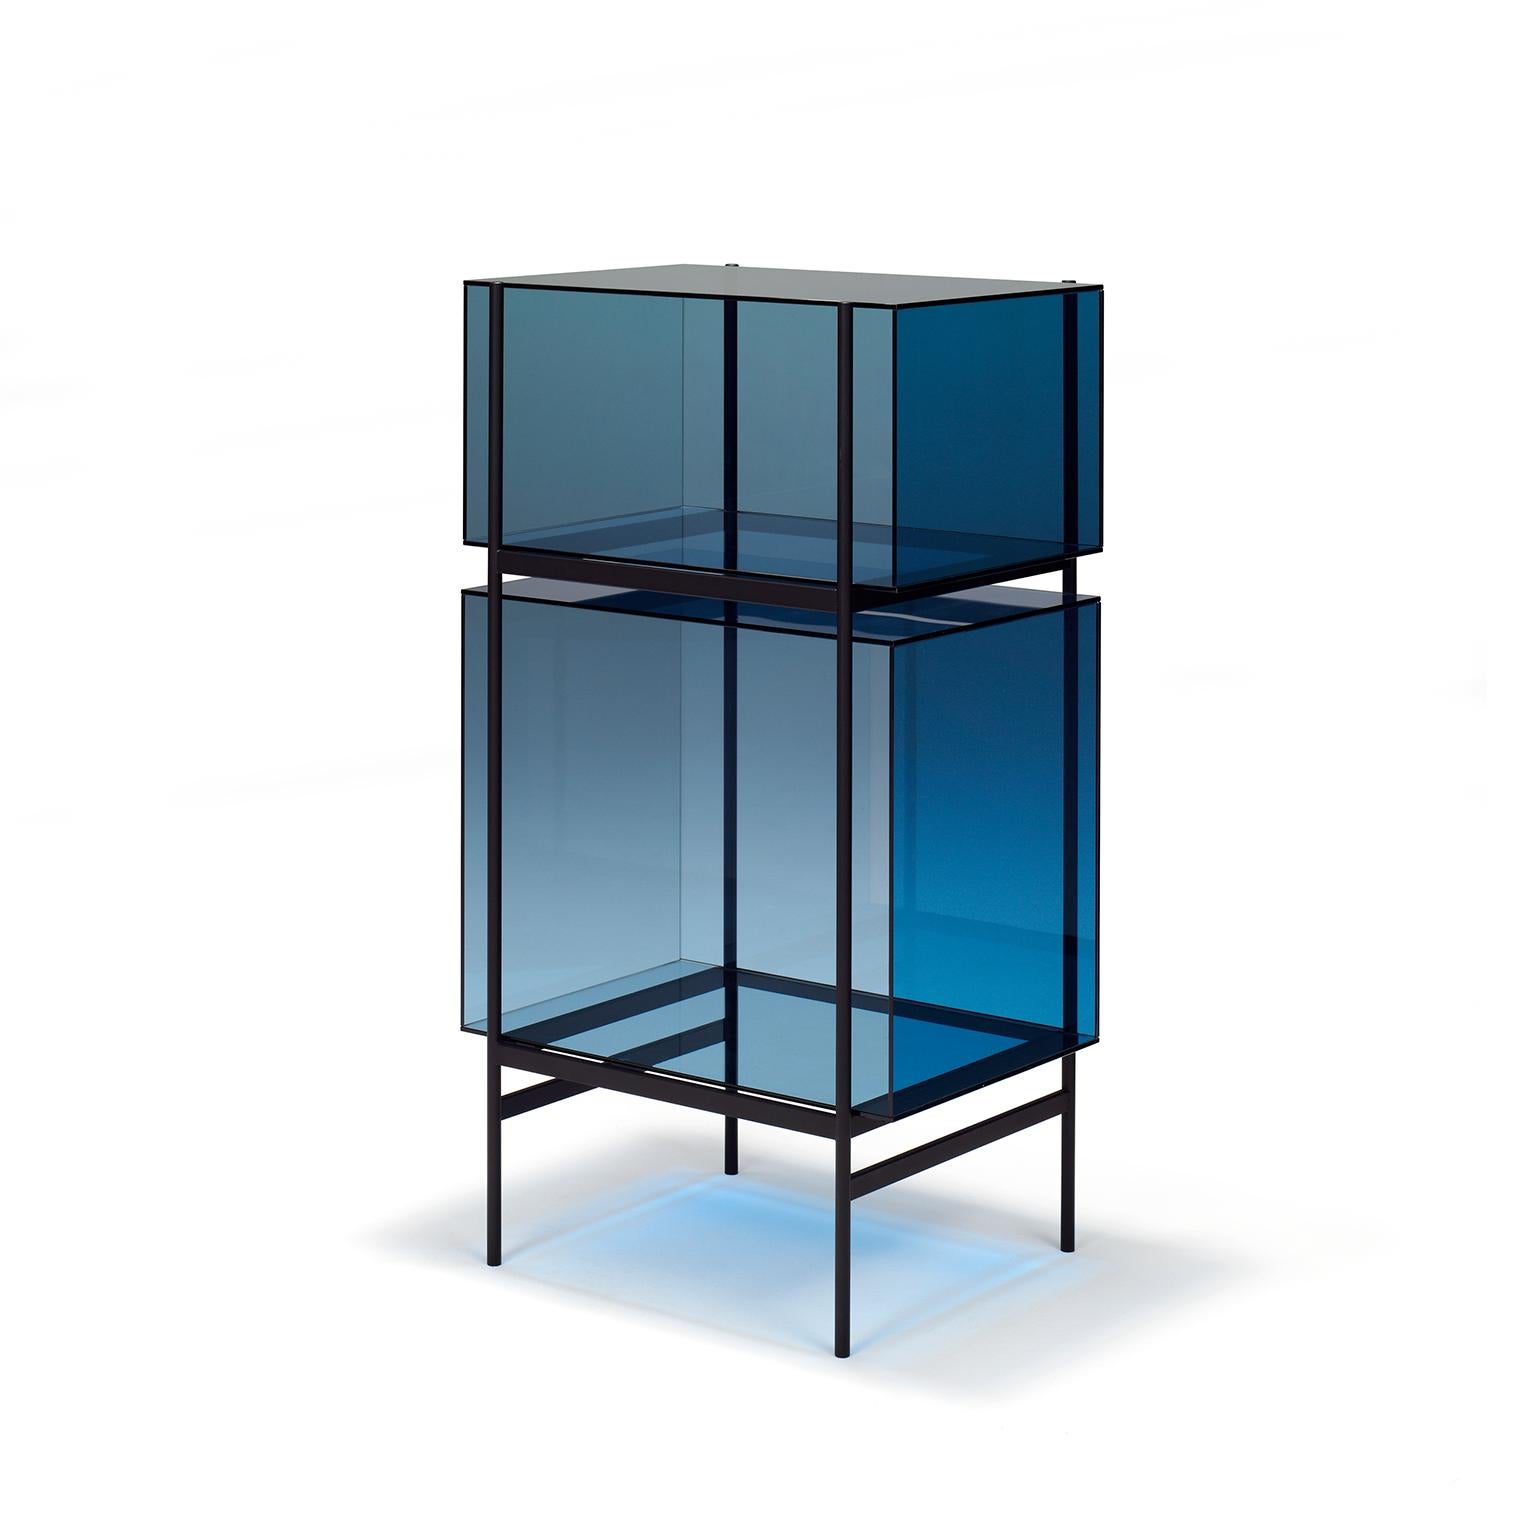 Lyn small blue black cabinet by Pulpo
Dimensions: D60 x W45 x H110 cm
Materials: glass; powder coated steel

Also available in different colours. 

Studio Visser & Meijwaard describe their conception of lyn as a “graphic interplay between